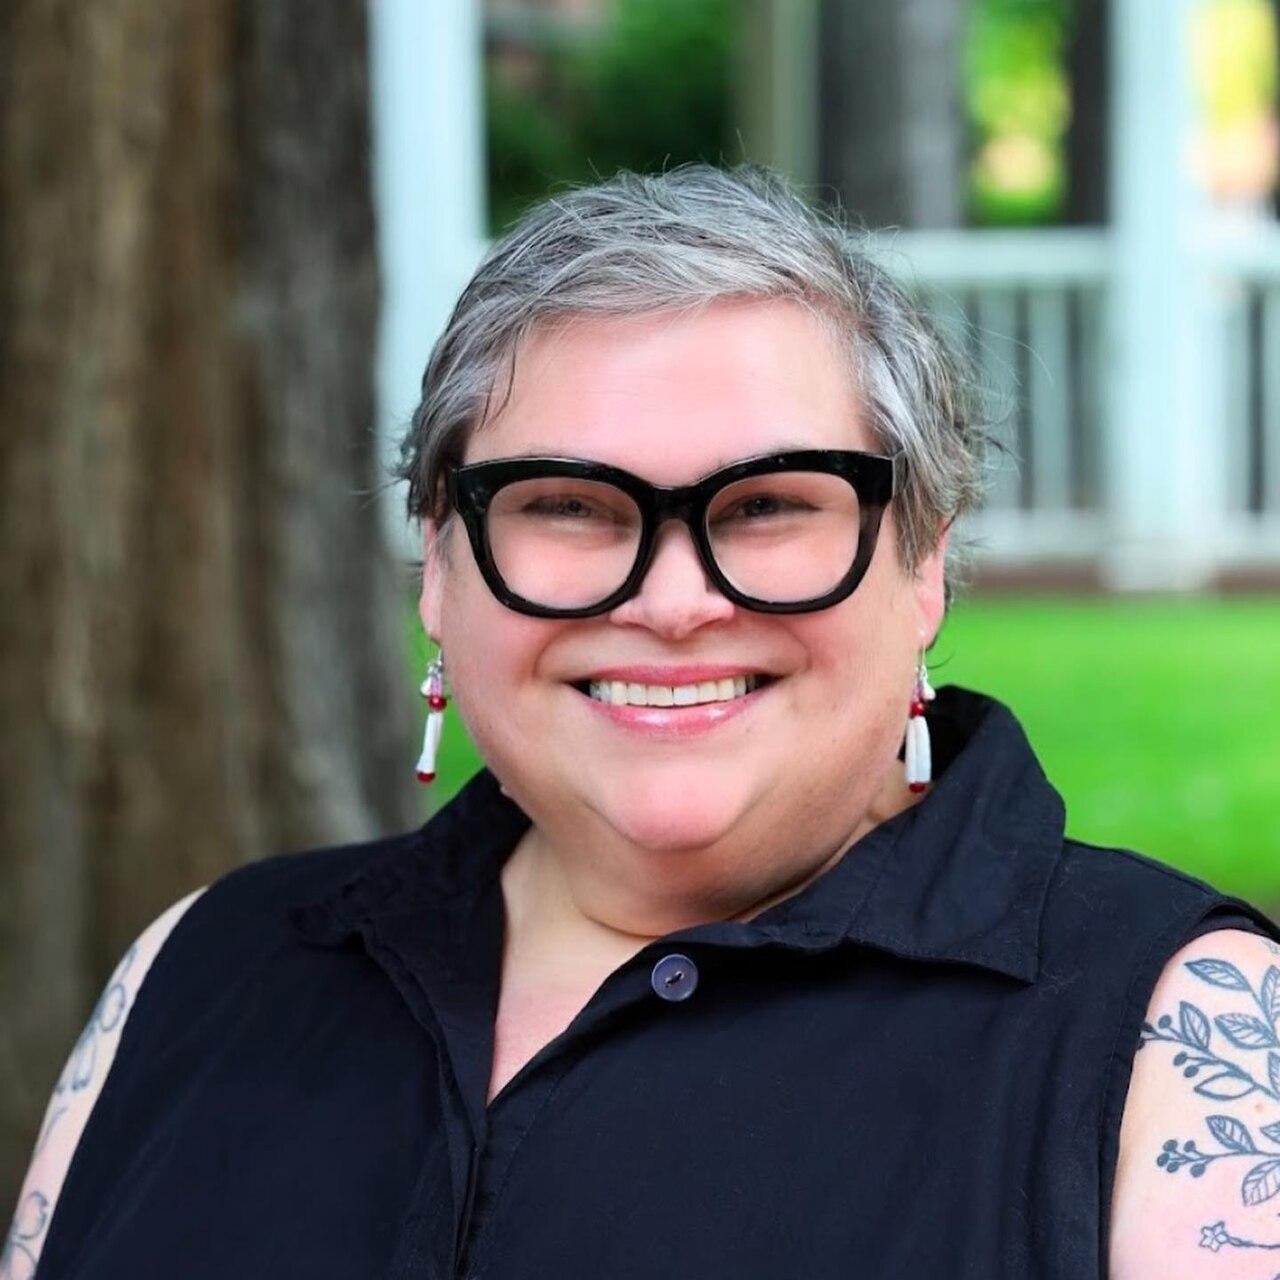 Angie Morrill has been named the inaugural director of Native American and Tribal Programs for the Oregon State University Division of Extension and Engagement.